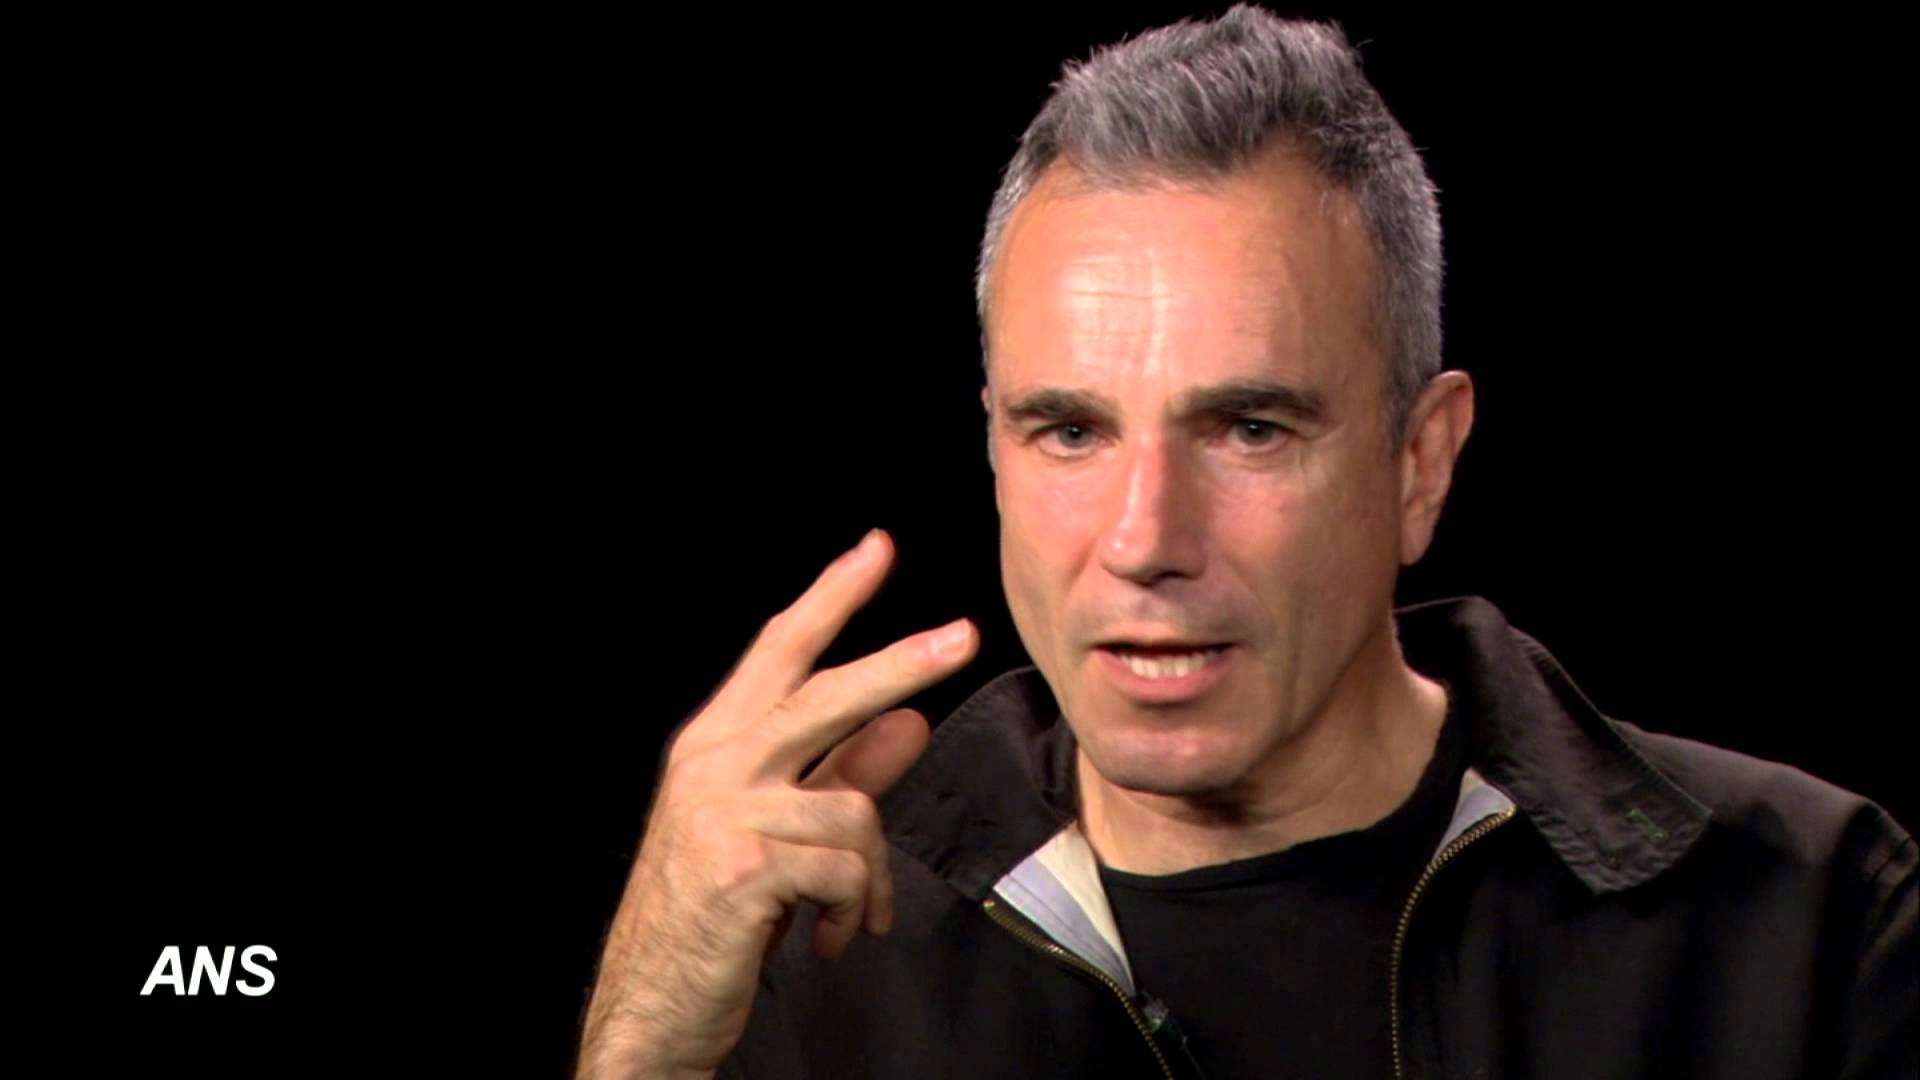 DANIEL DAY LEWIS TALKS DIFFICULTY ENDING ROLE AS LINCOLN